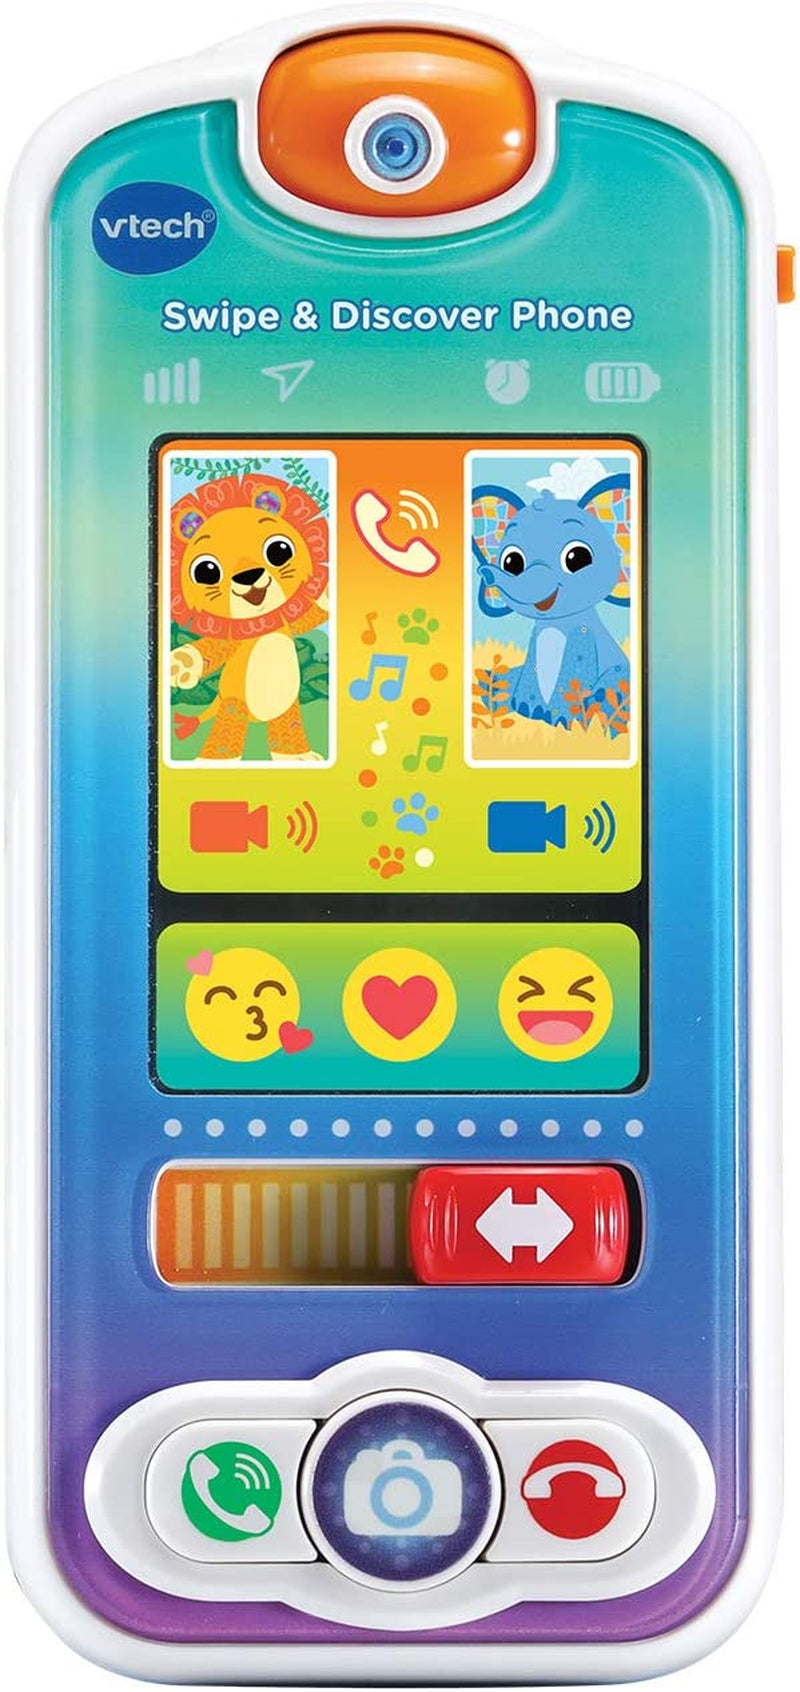 Vtech Swipe & Discover Phone Play Phone for Baby 